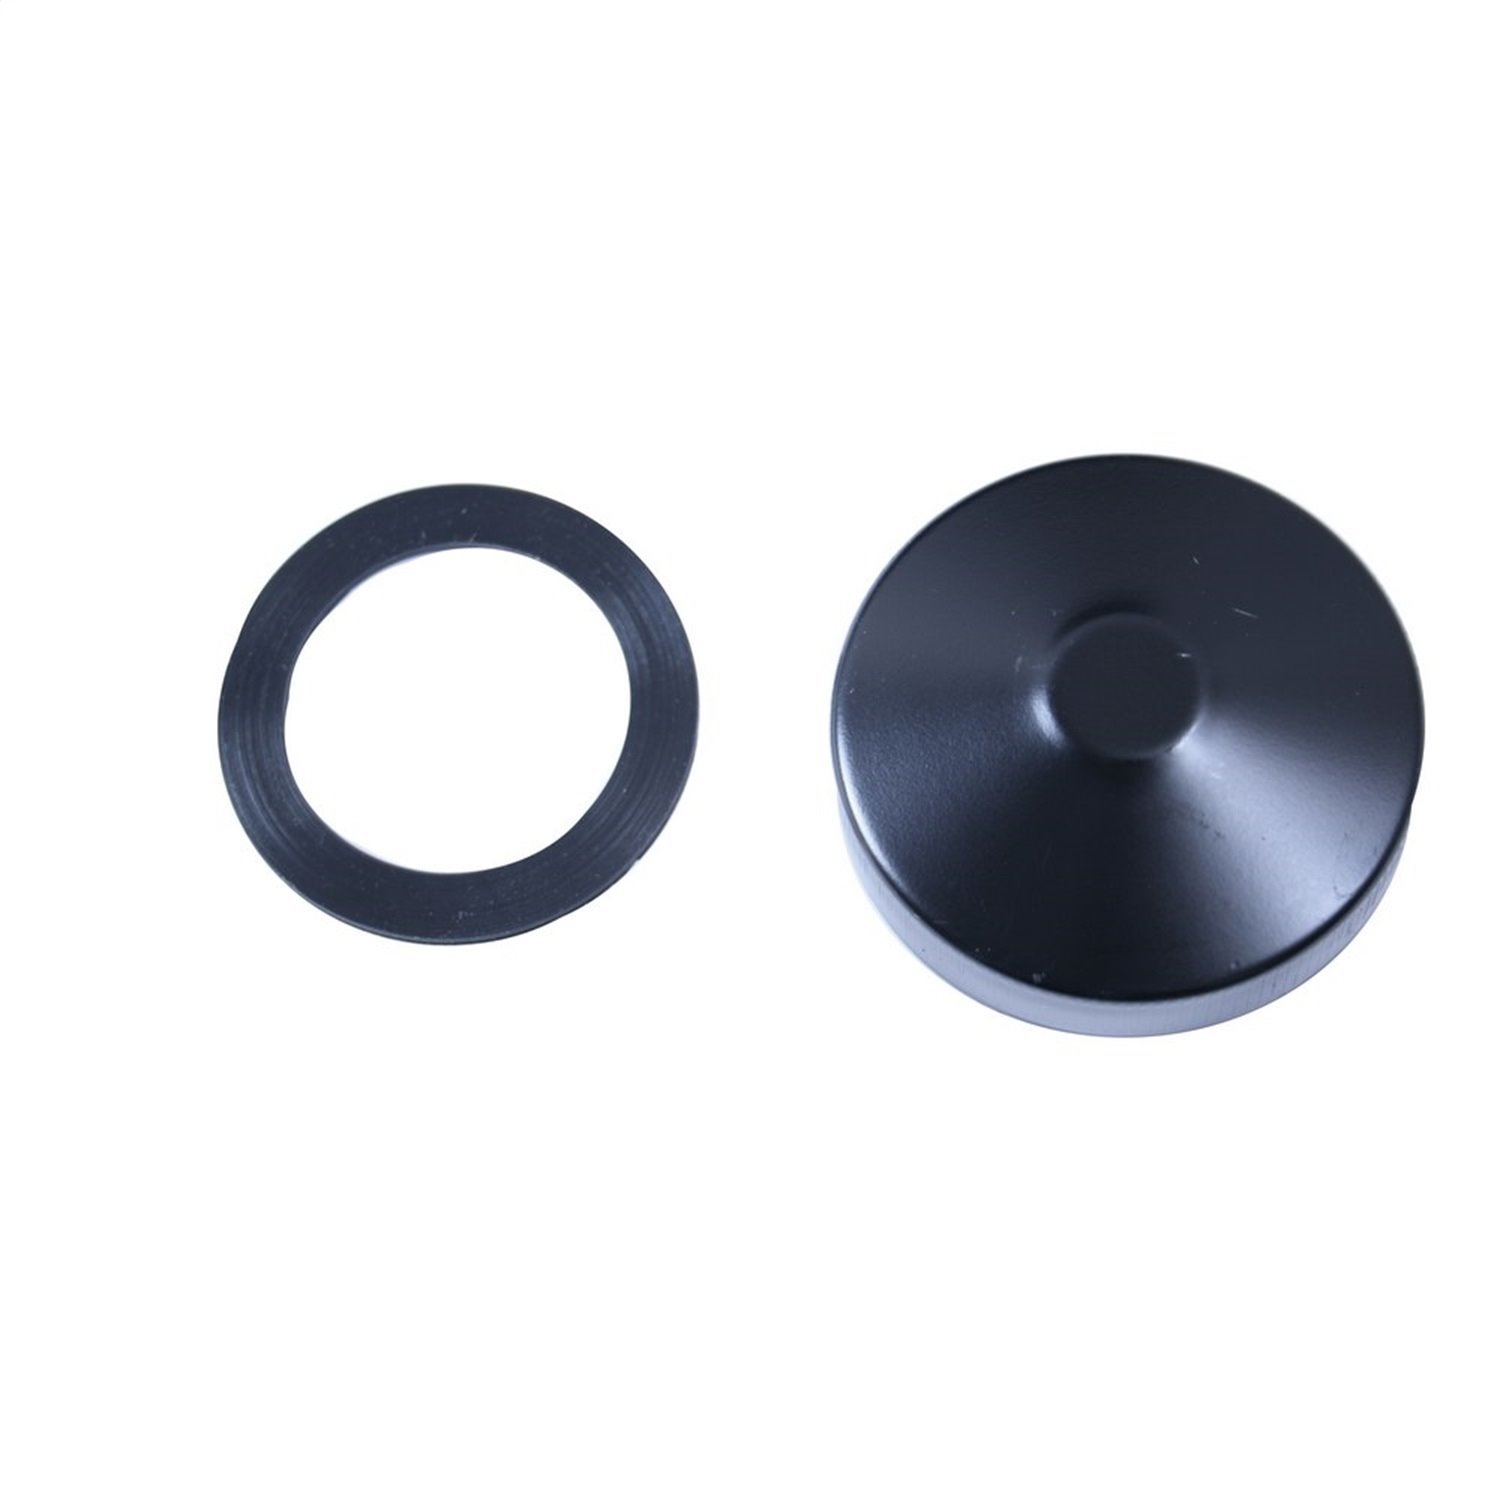 This black non-vented gas cap from Omix-ADA fits